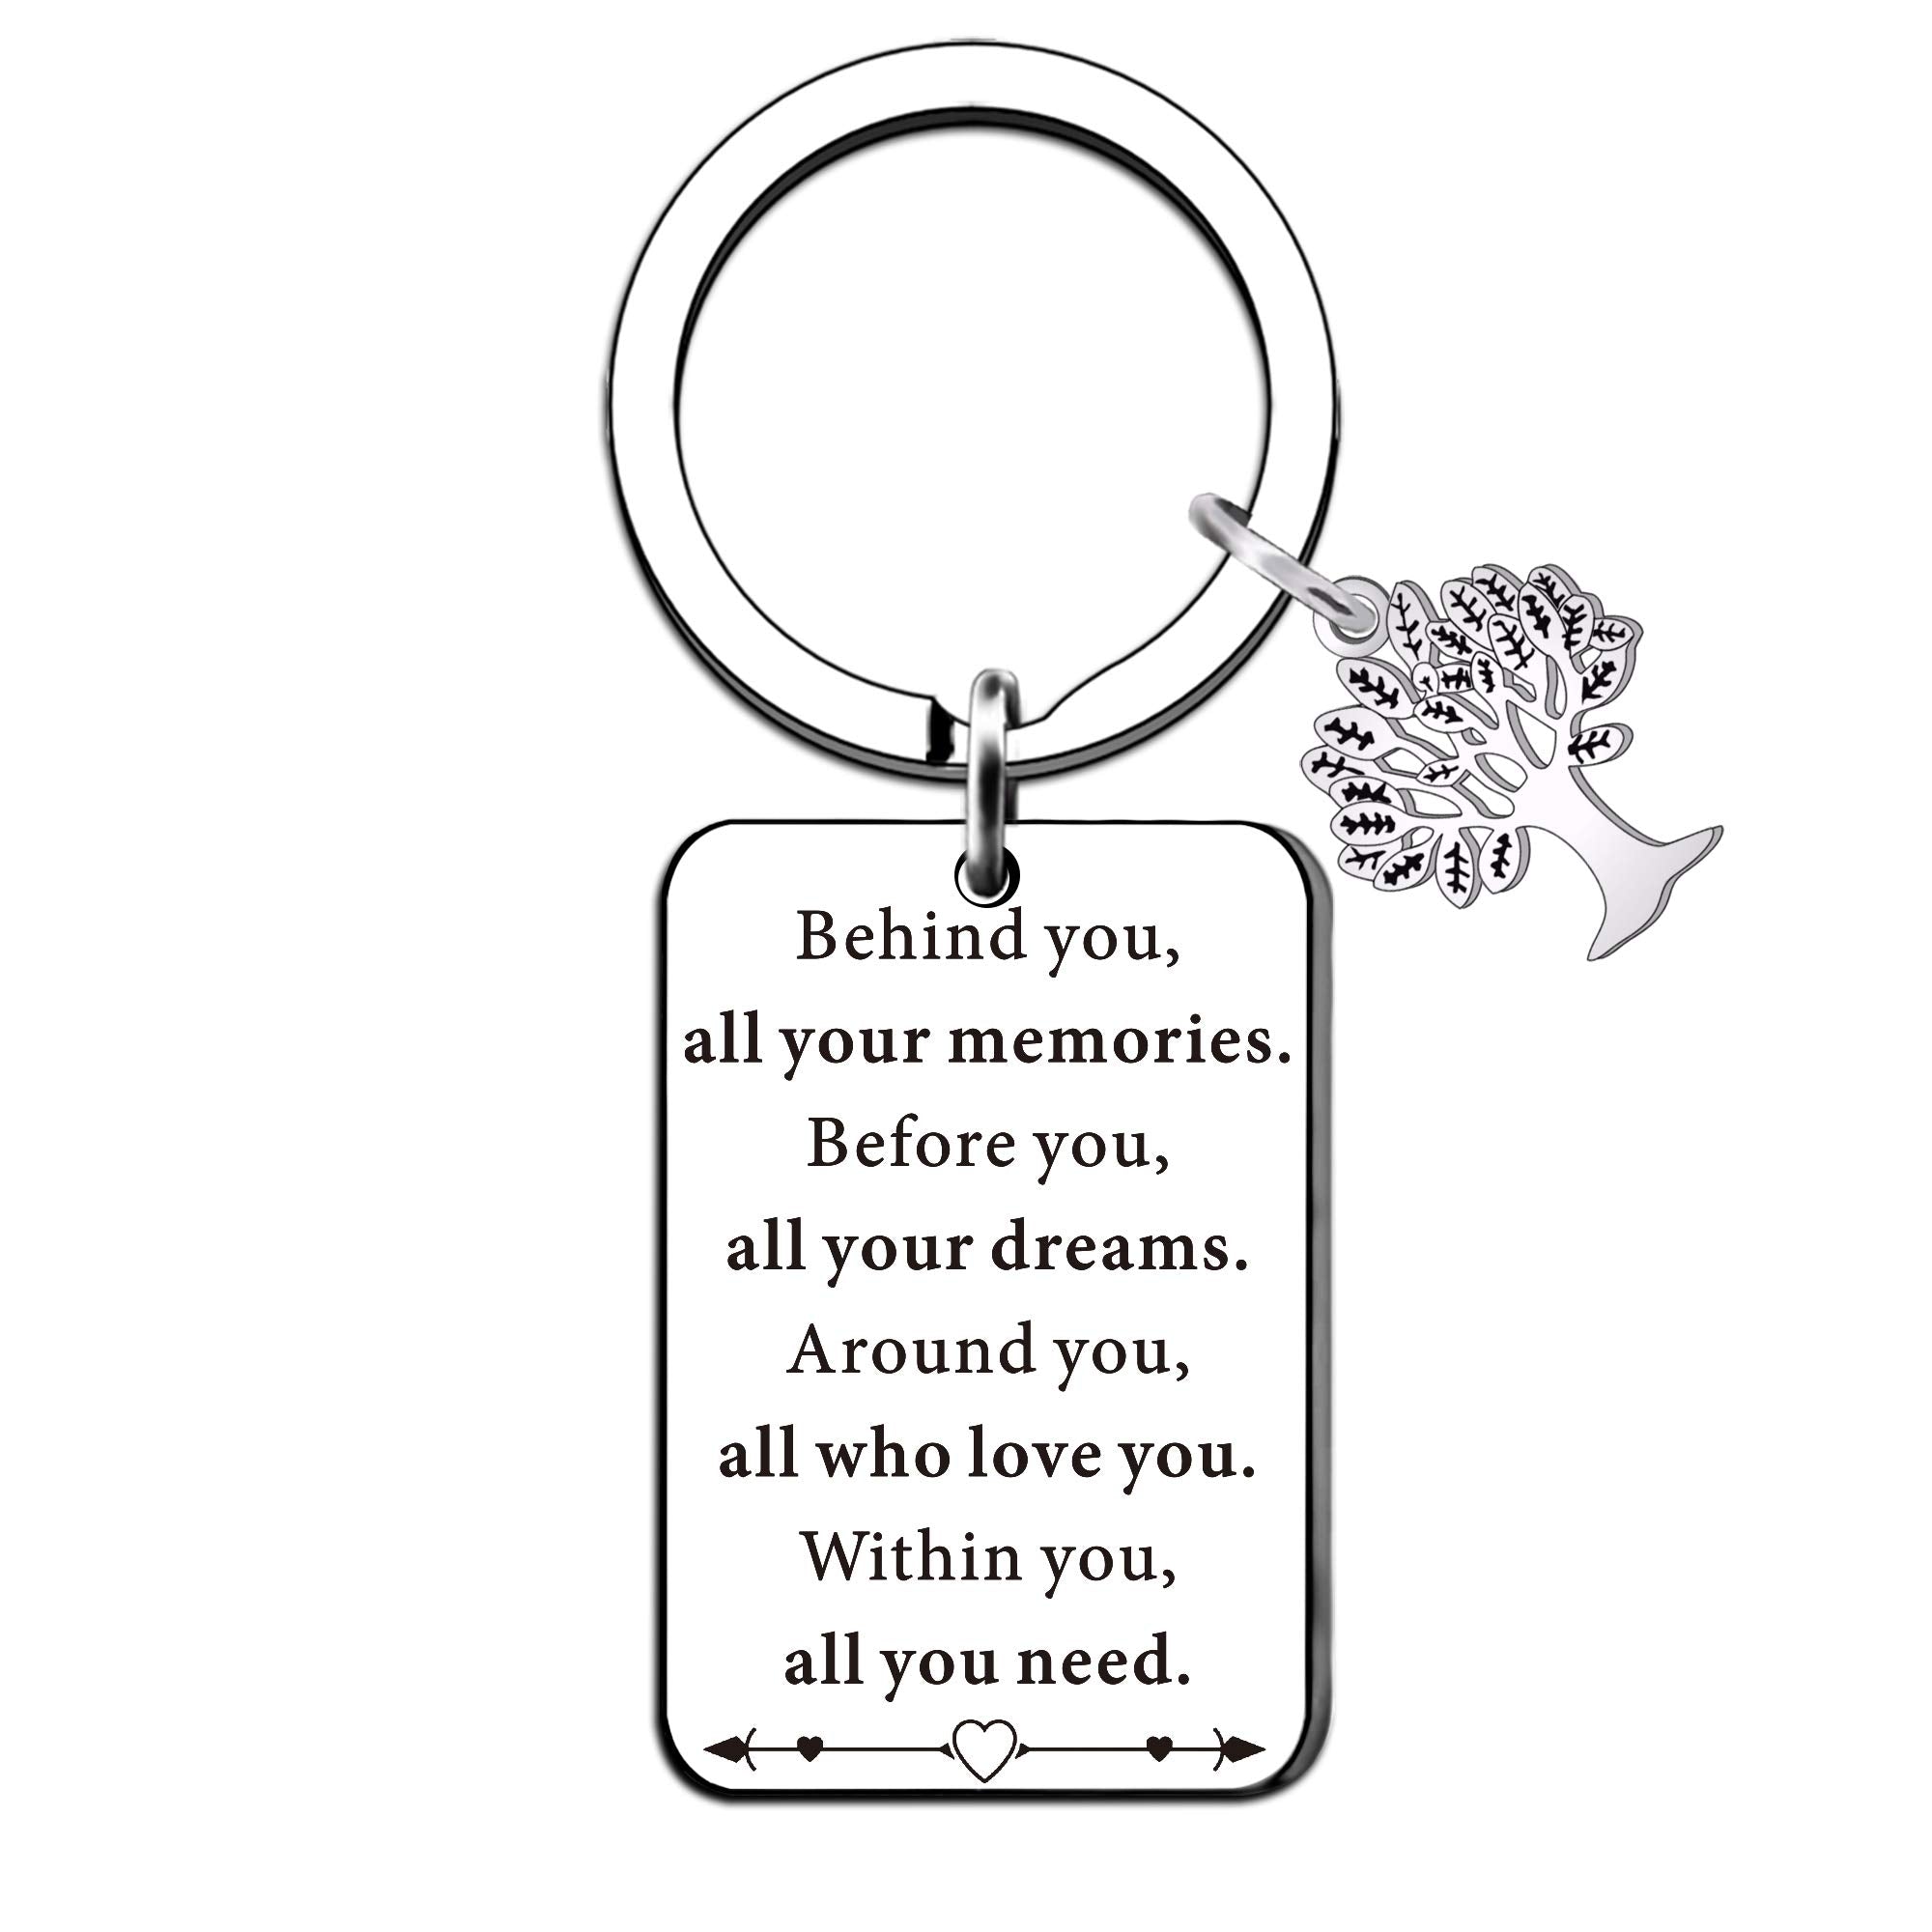 QMVMV Inspiration Keyring Tree of Life Encouragement Keychain Behind You All Your Memories Before You All Your Dreams Around You All Who Love You Within You All You Need